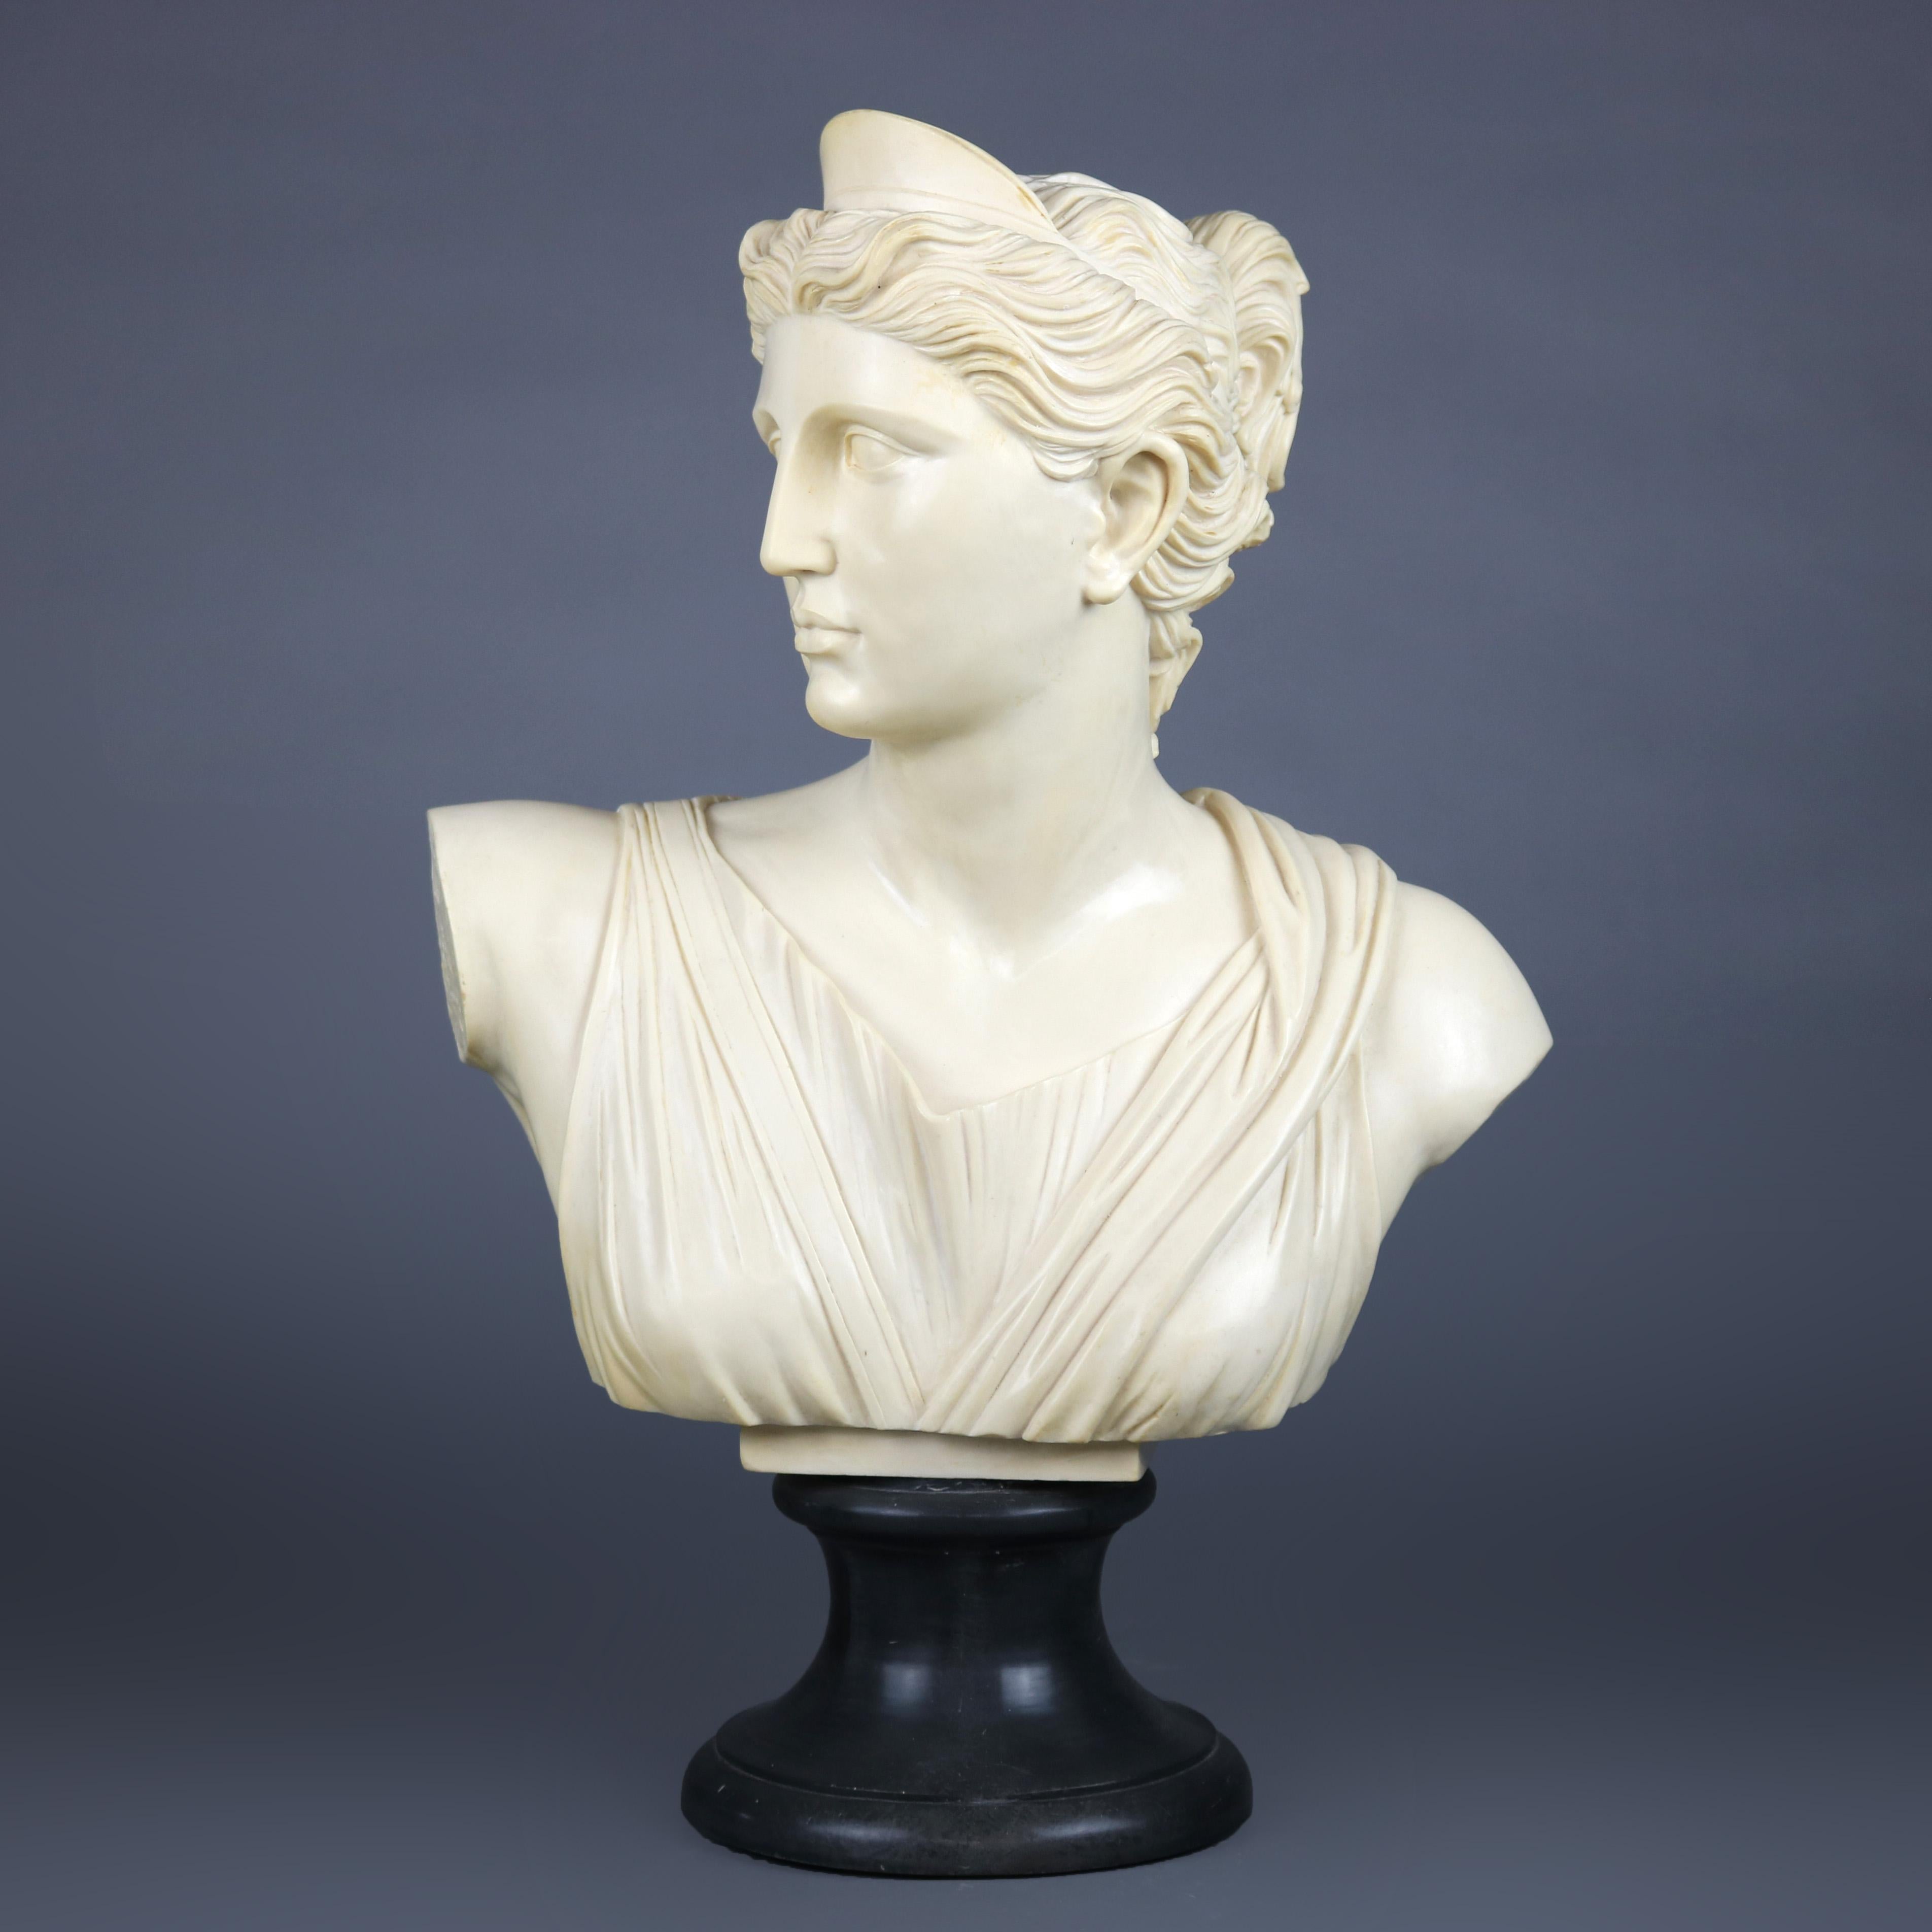 Neoclassical composition portrait bust of classical Greek Artemis or the Greek Diana of Versailles, raised on stepped plinth, en verso signed A. Santini, 20th century

Measures: 19.5